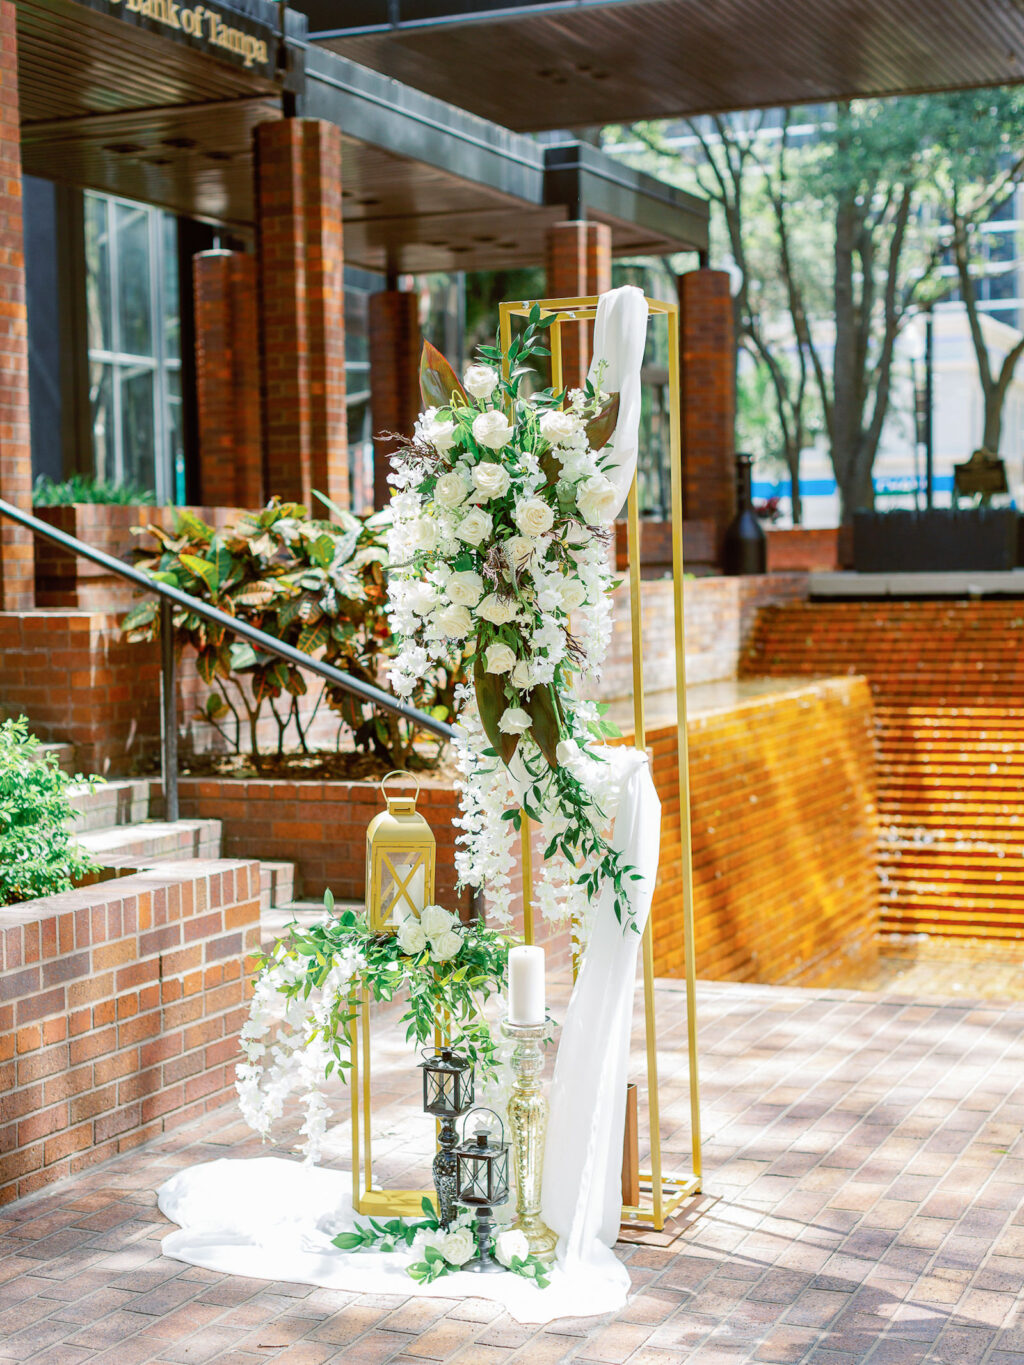 Gold Wedding Décor with White Floral Details and Greenery | South Florida Wedding Venue Hilton Downtown Tampa | Gabro Event Services